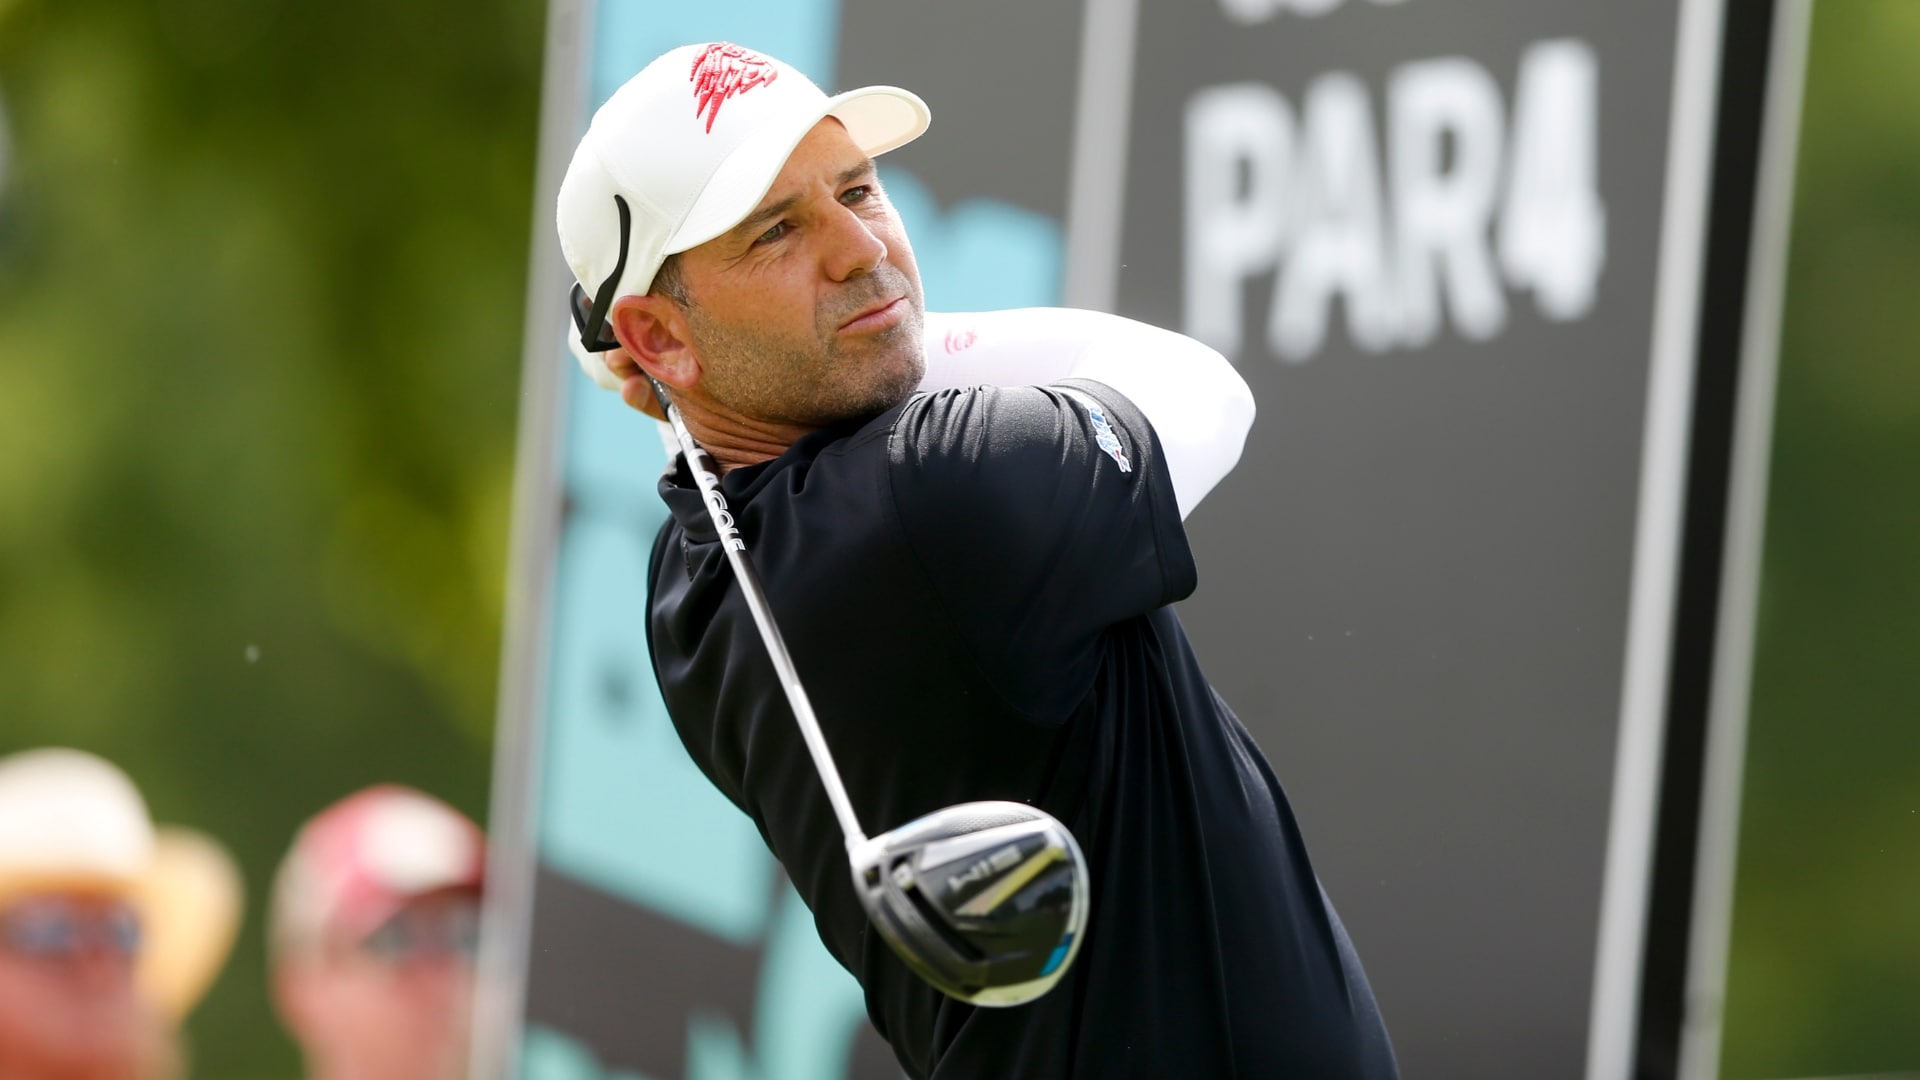 Sergio among 8 to qualify for U.S. Open; Carson Young blitzes Dallas field with 3’s